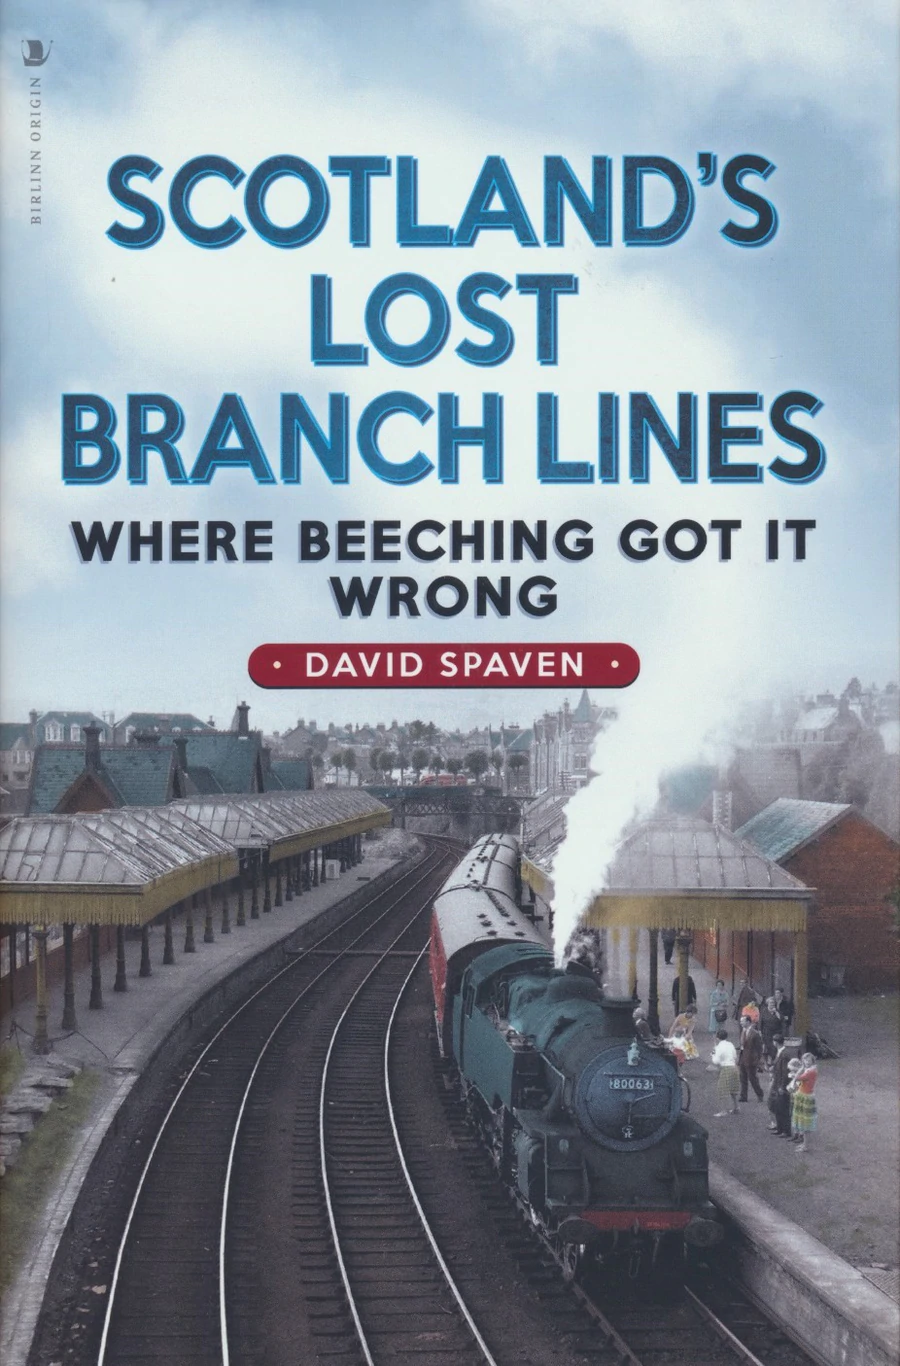 Scotland's Lost Branch Lines - Where Beeching Got It Wrong